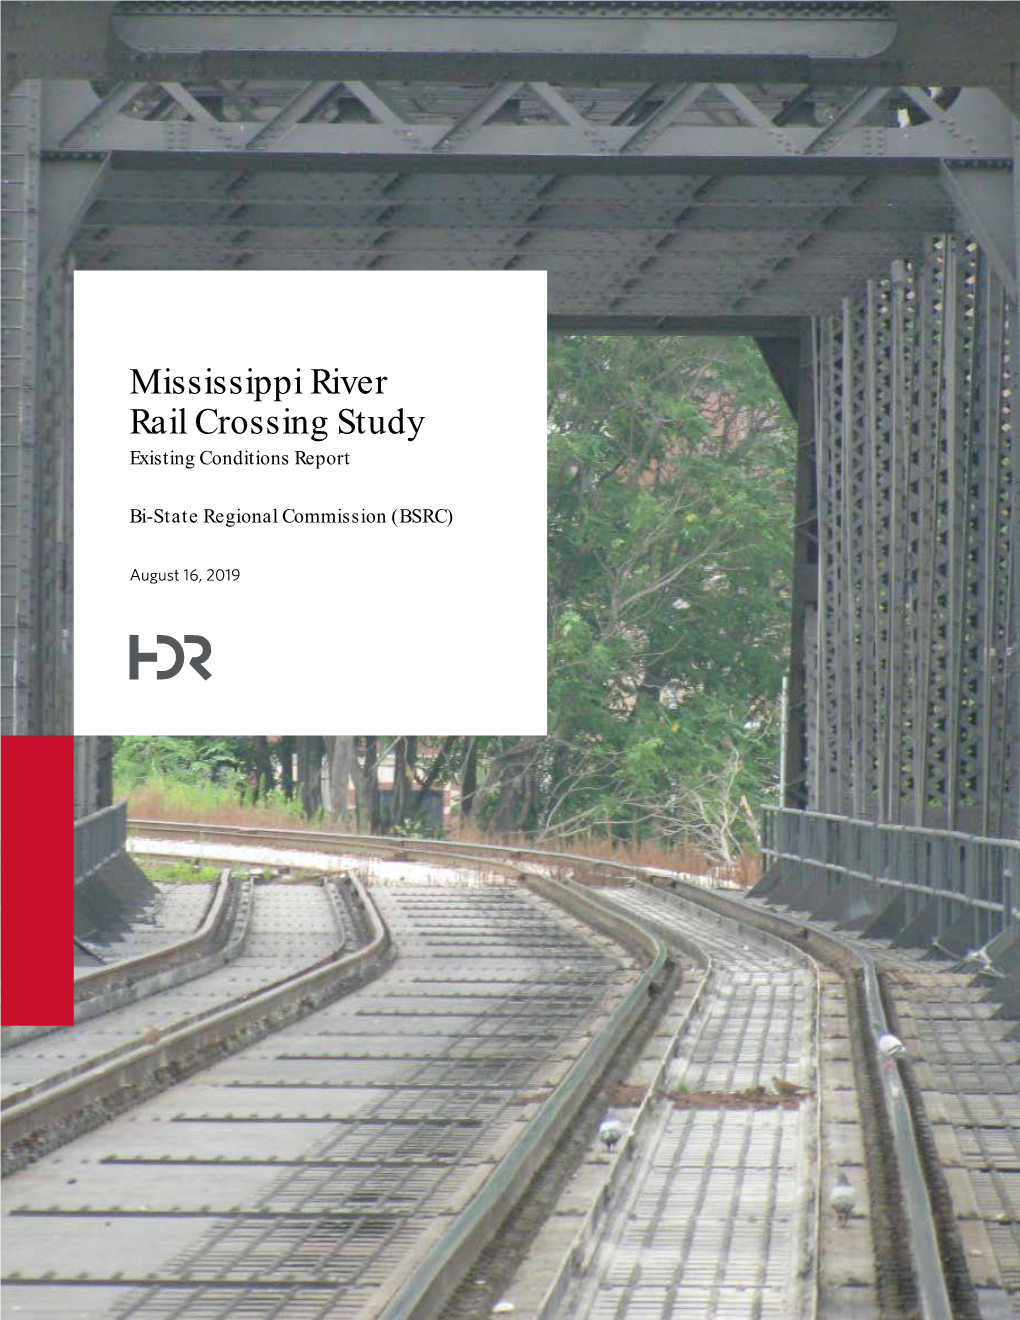 Mississippi River Rail Crossing Study Existing Conditions Report